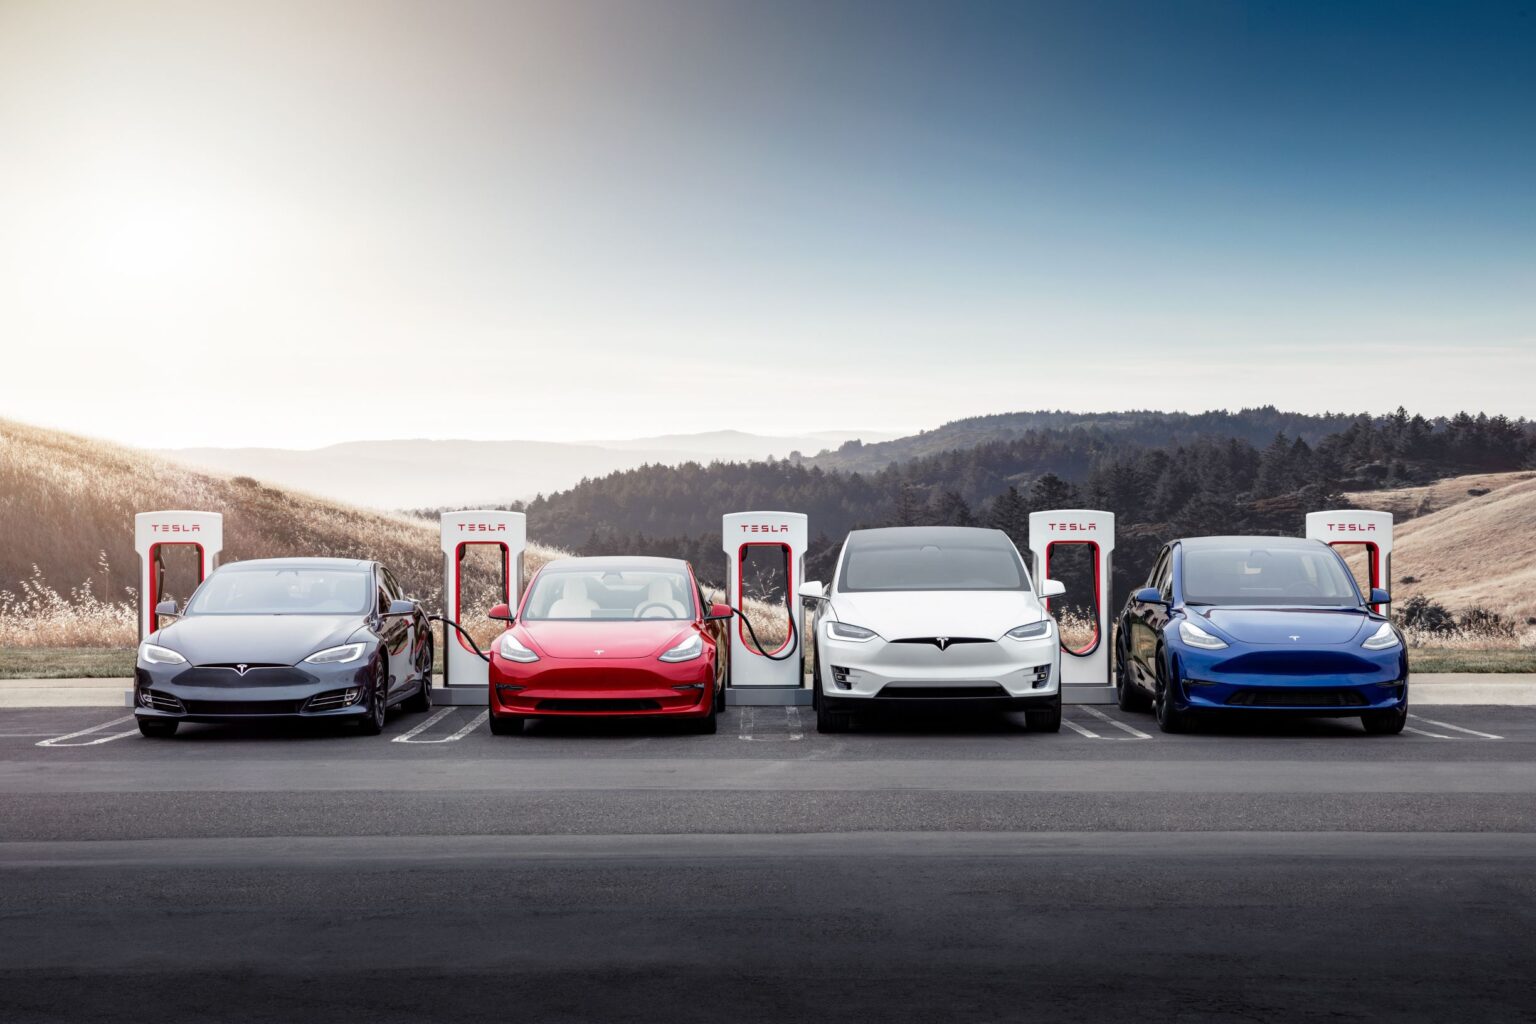 The Tesla lineup...which one would you buy? Electric Road